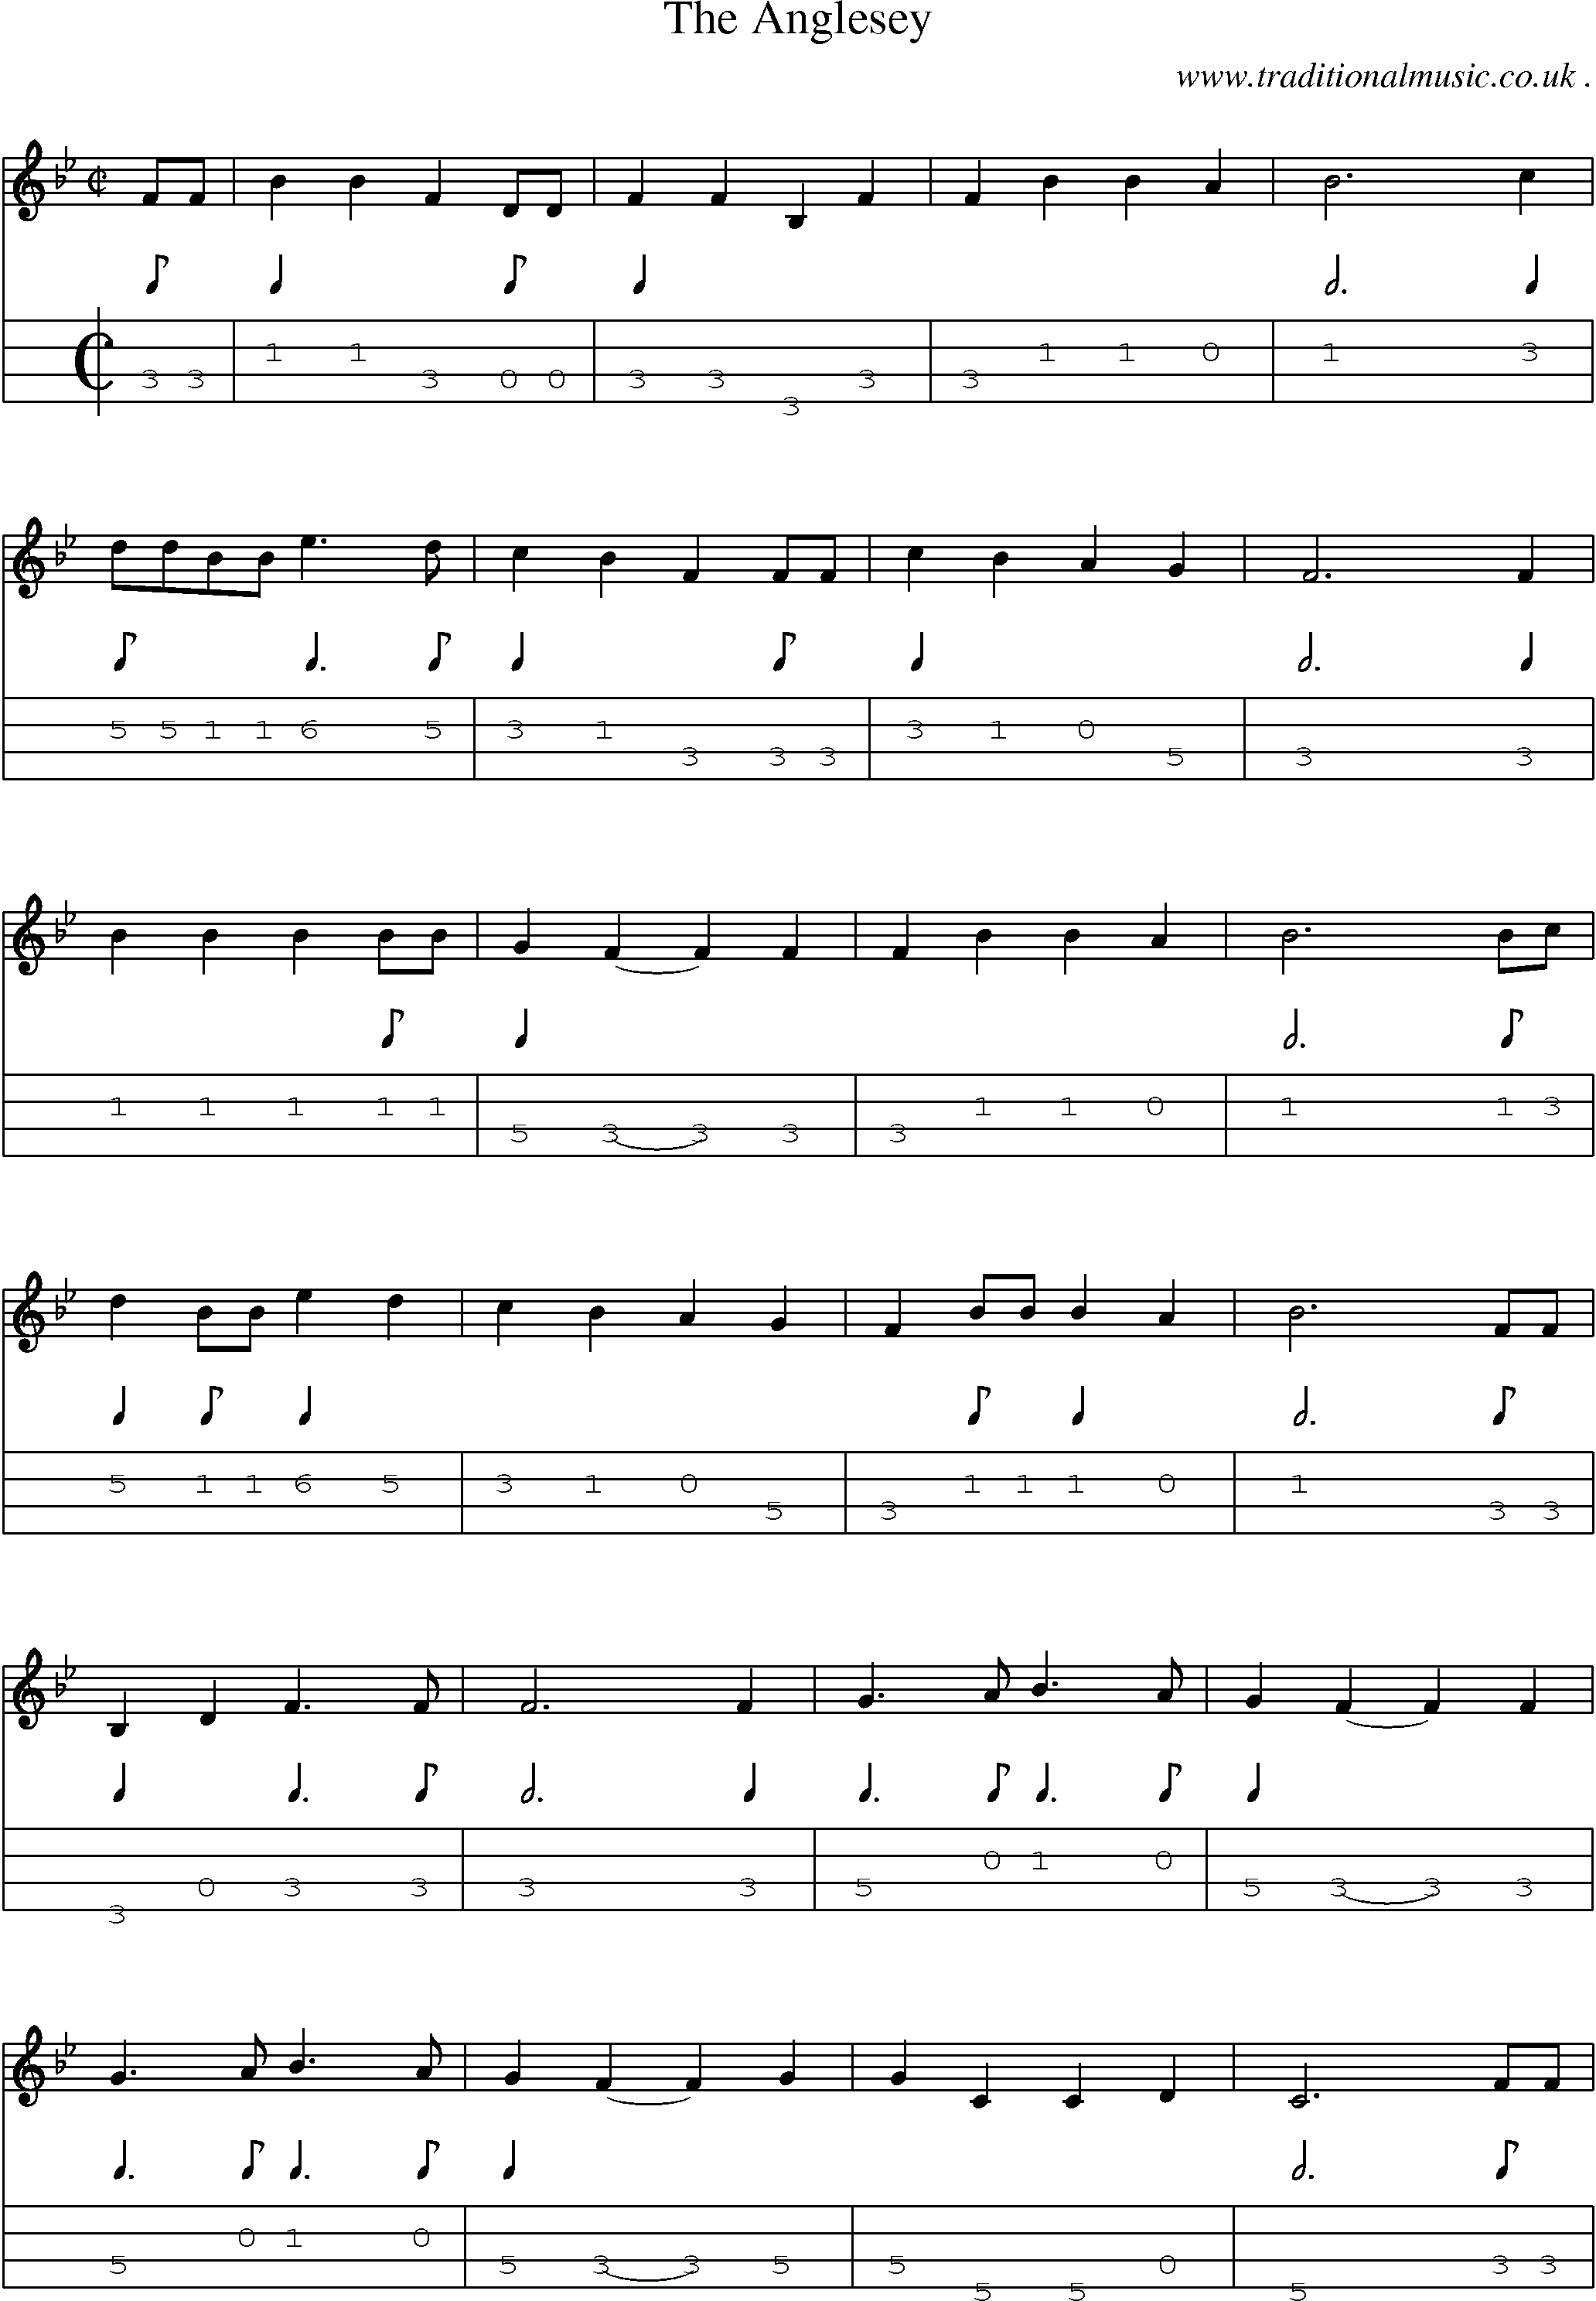 Sheet-Music and Mandolin Tabs for The Anglesey